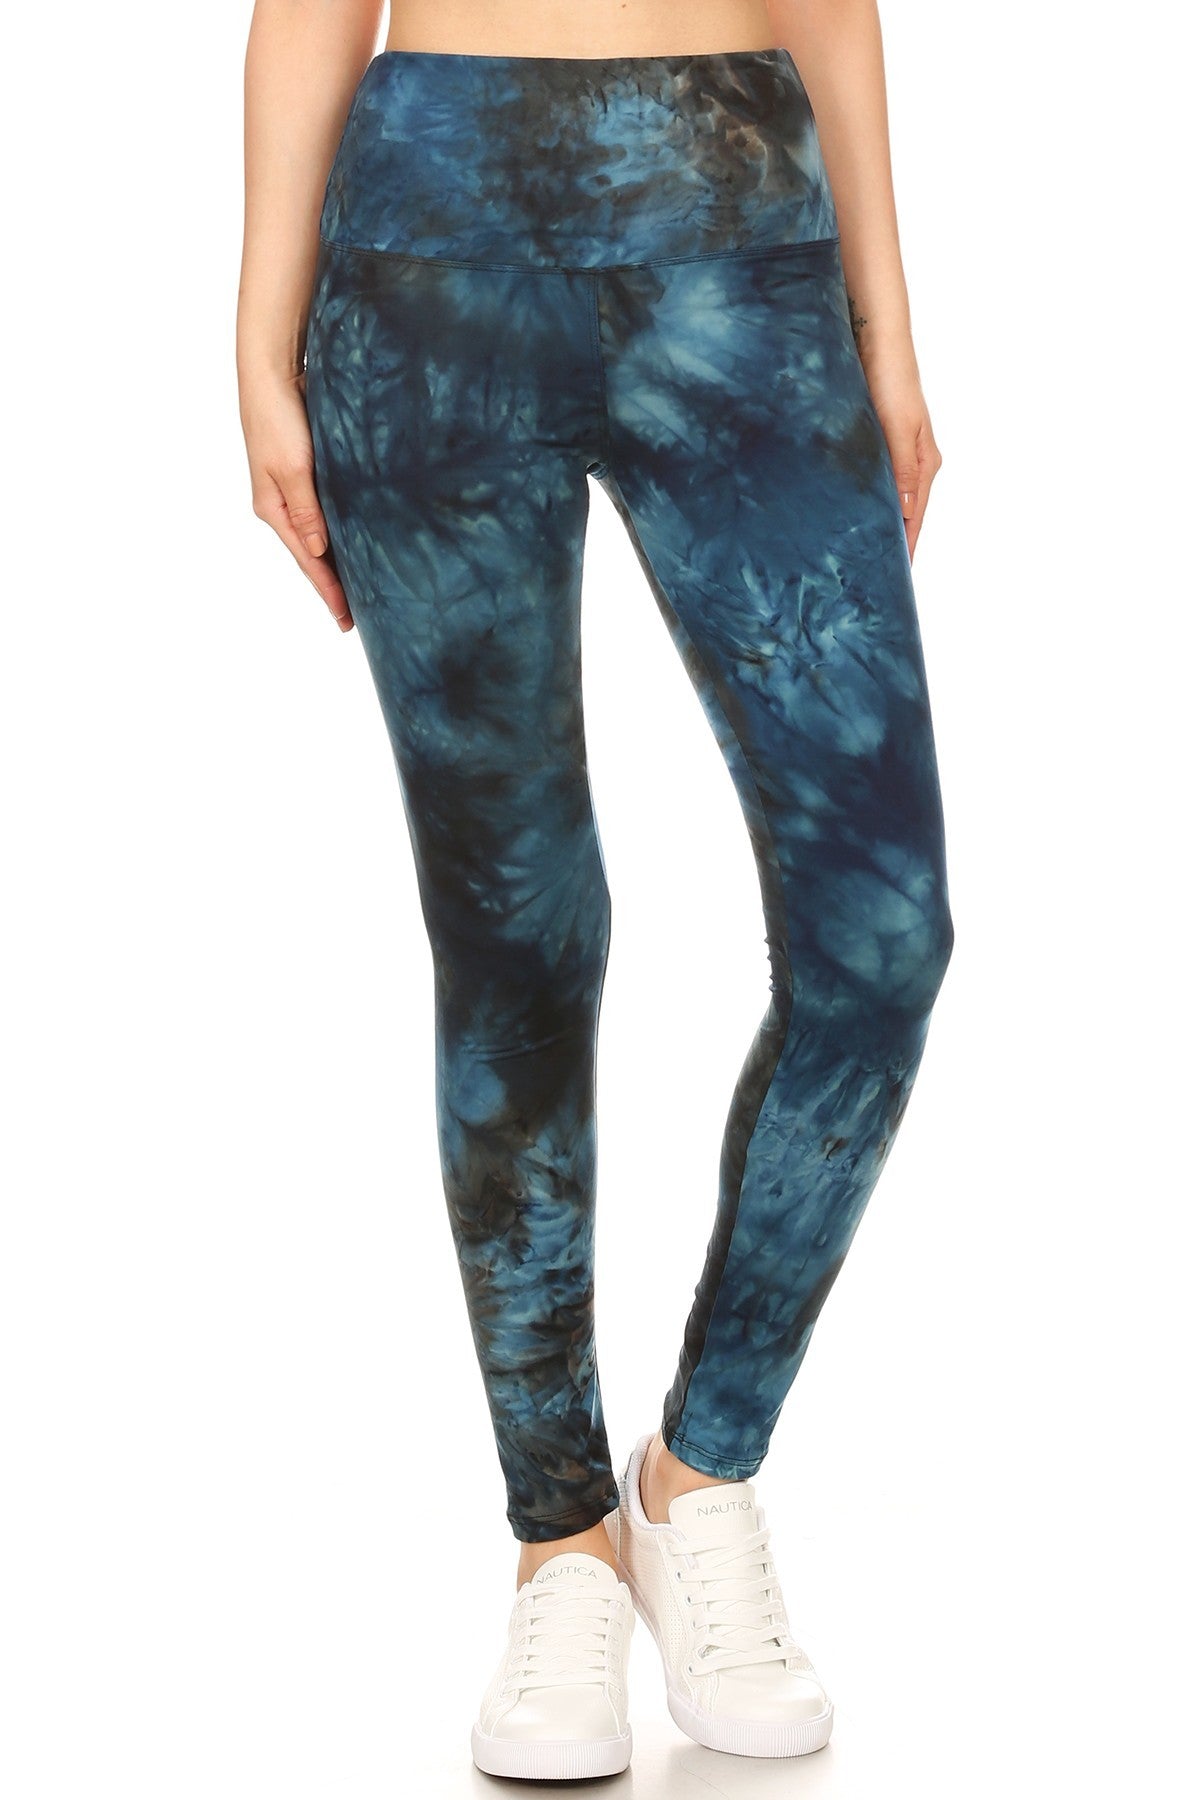 5-inch Long Yoga Style Banded Lined Tie Dye Printed Knit Legging With High Waist_ Bottoms jehouze 